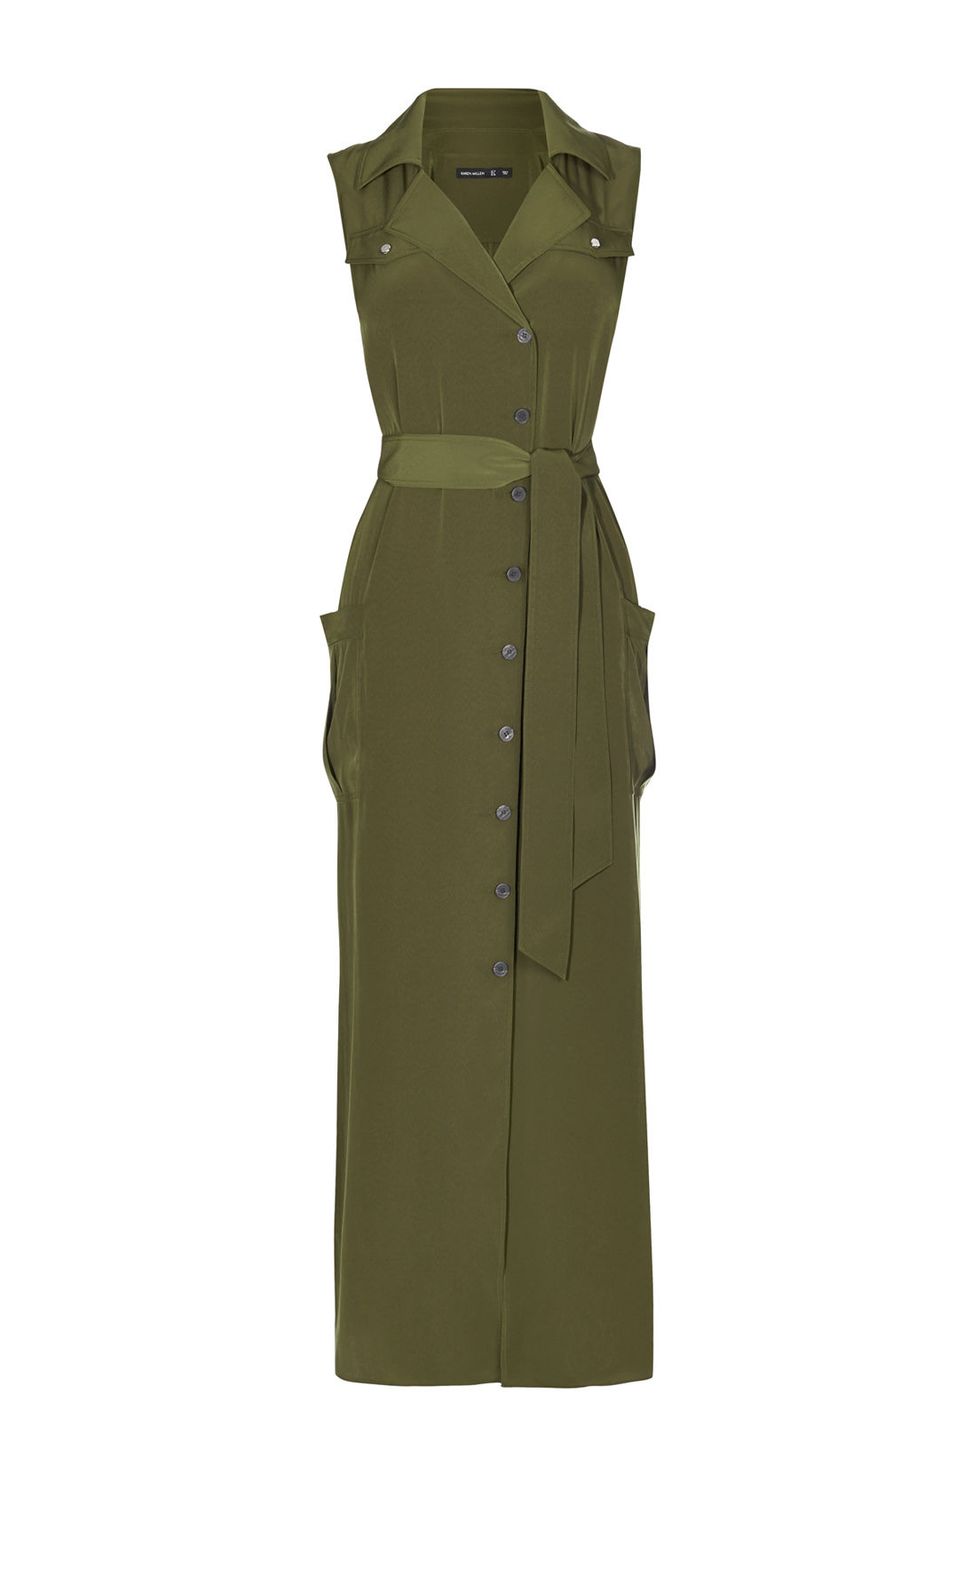 Clothing, Day dress, Dress, Green, Khaki, Outerwear, One-piece garment, Cocktail dress, Sleeve, Trench coat, 